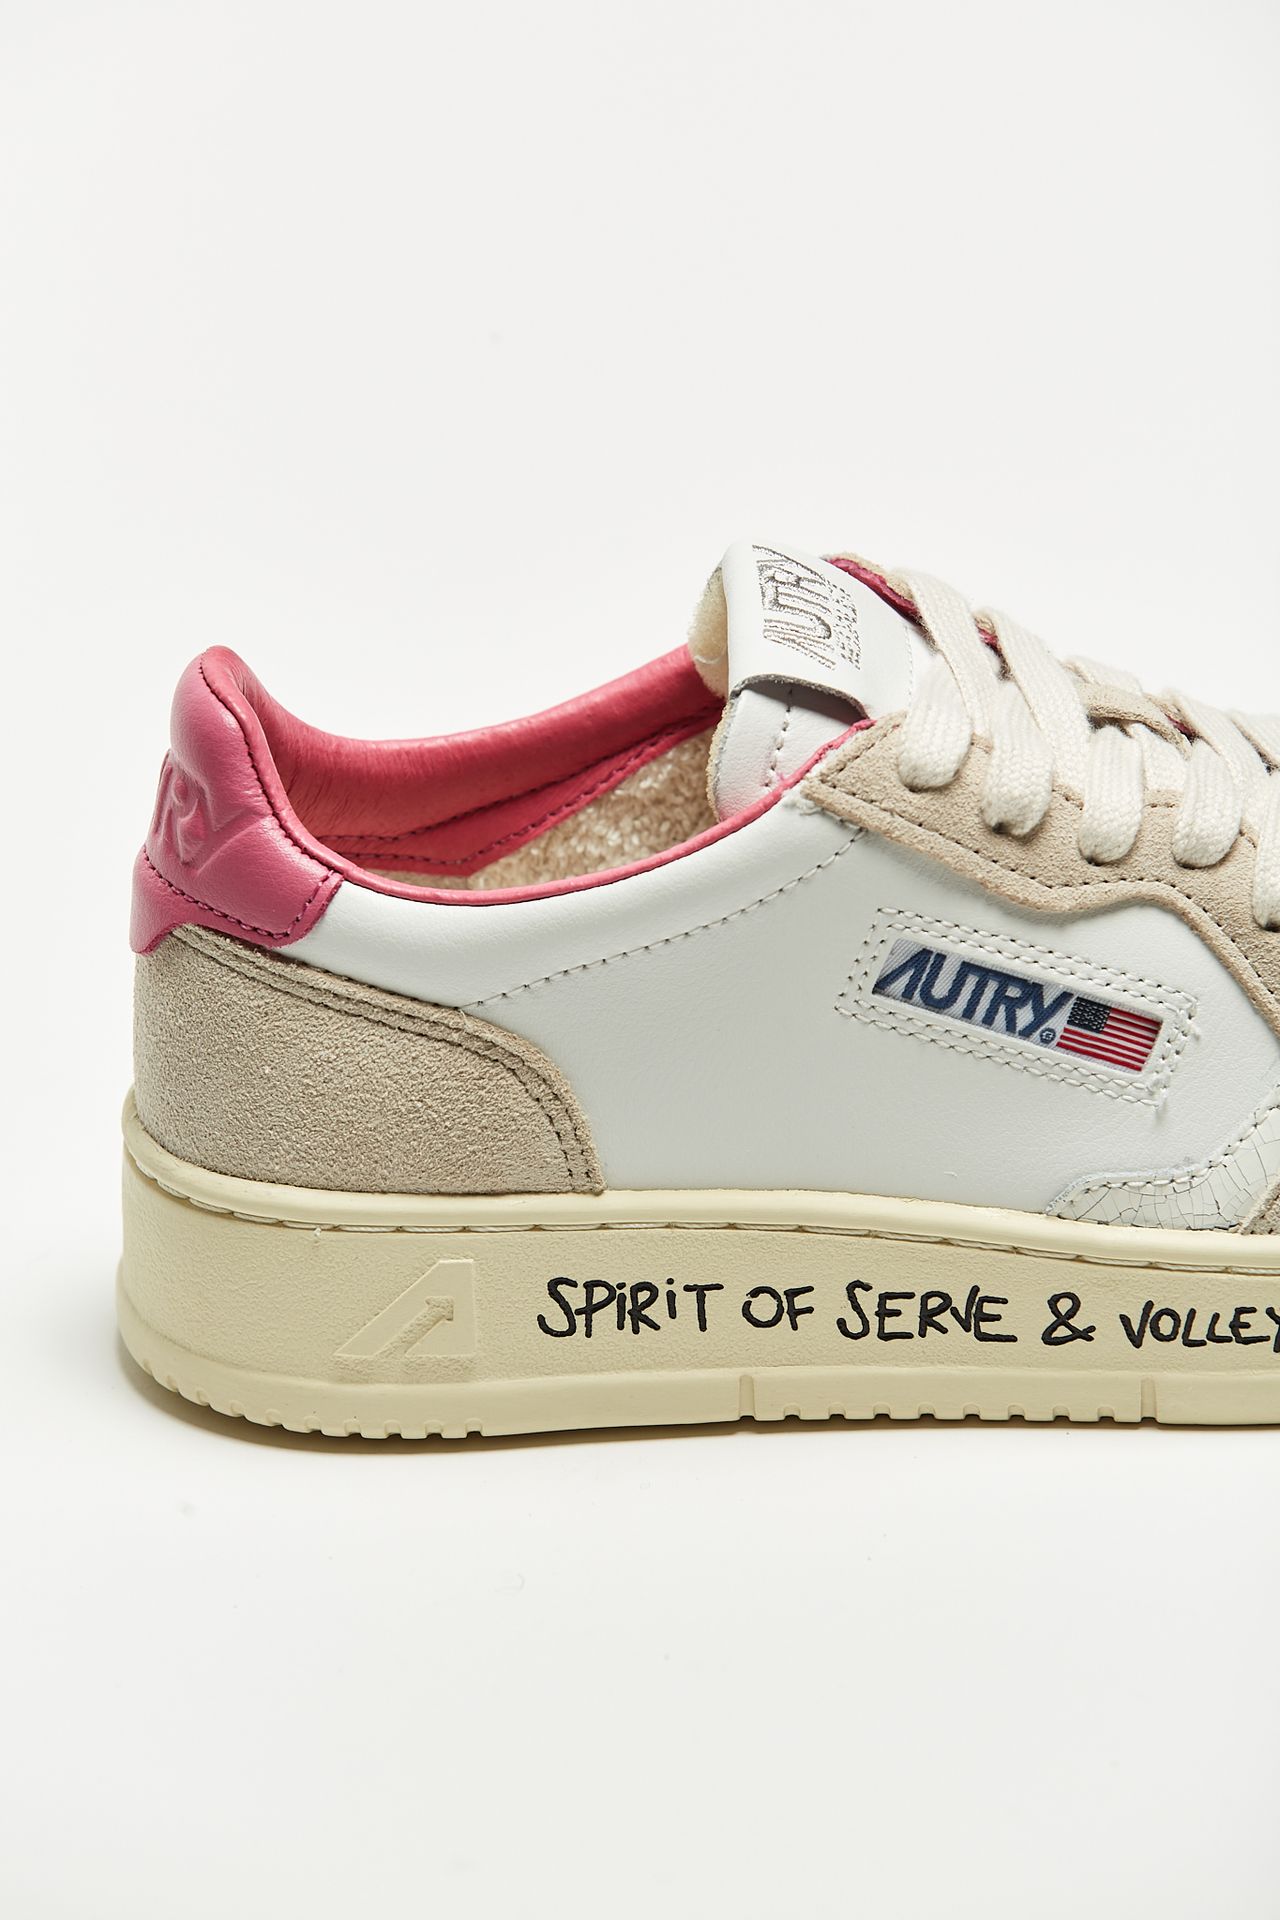 Autry volley suede fucsia vy04